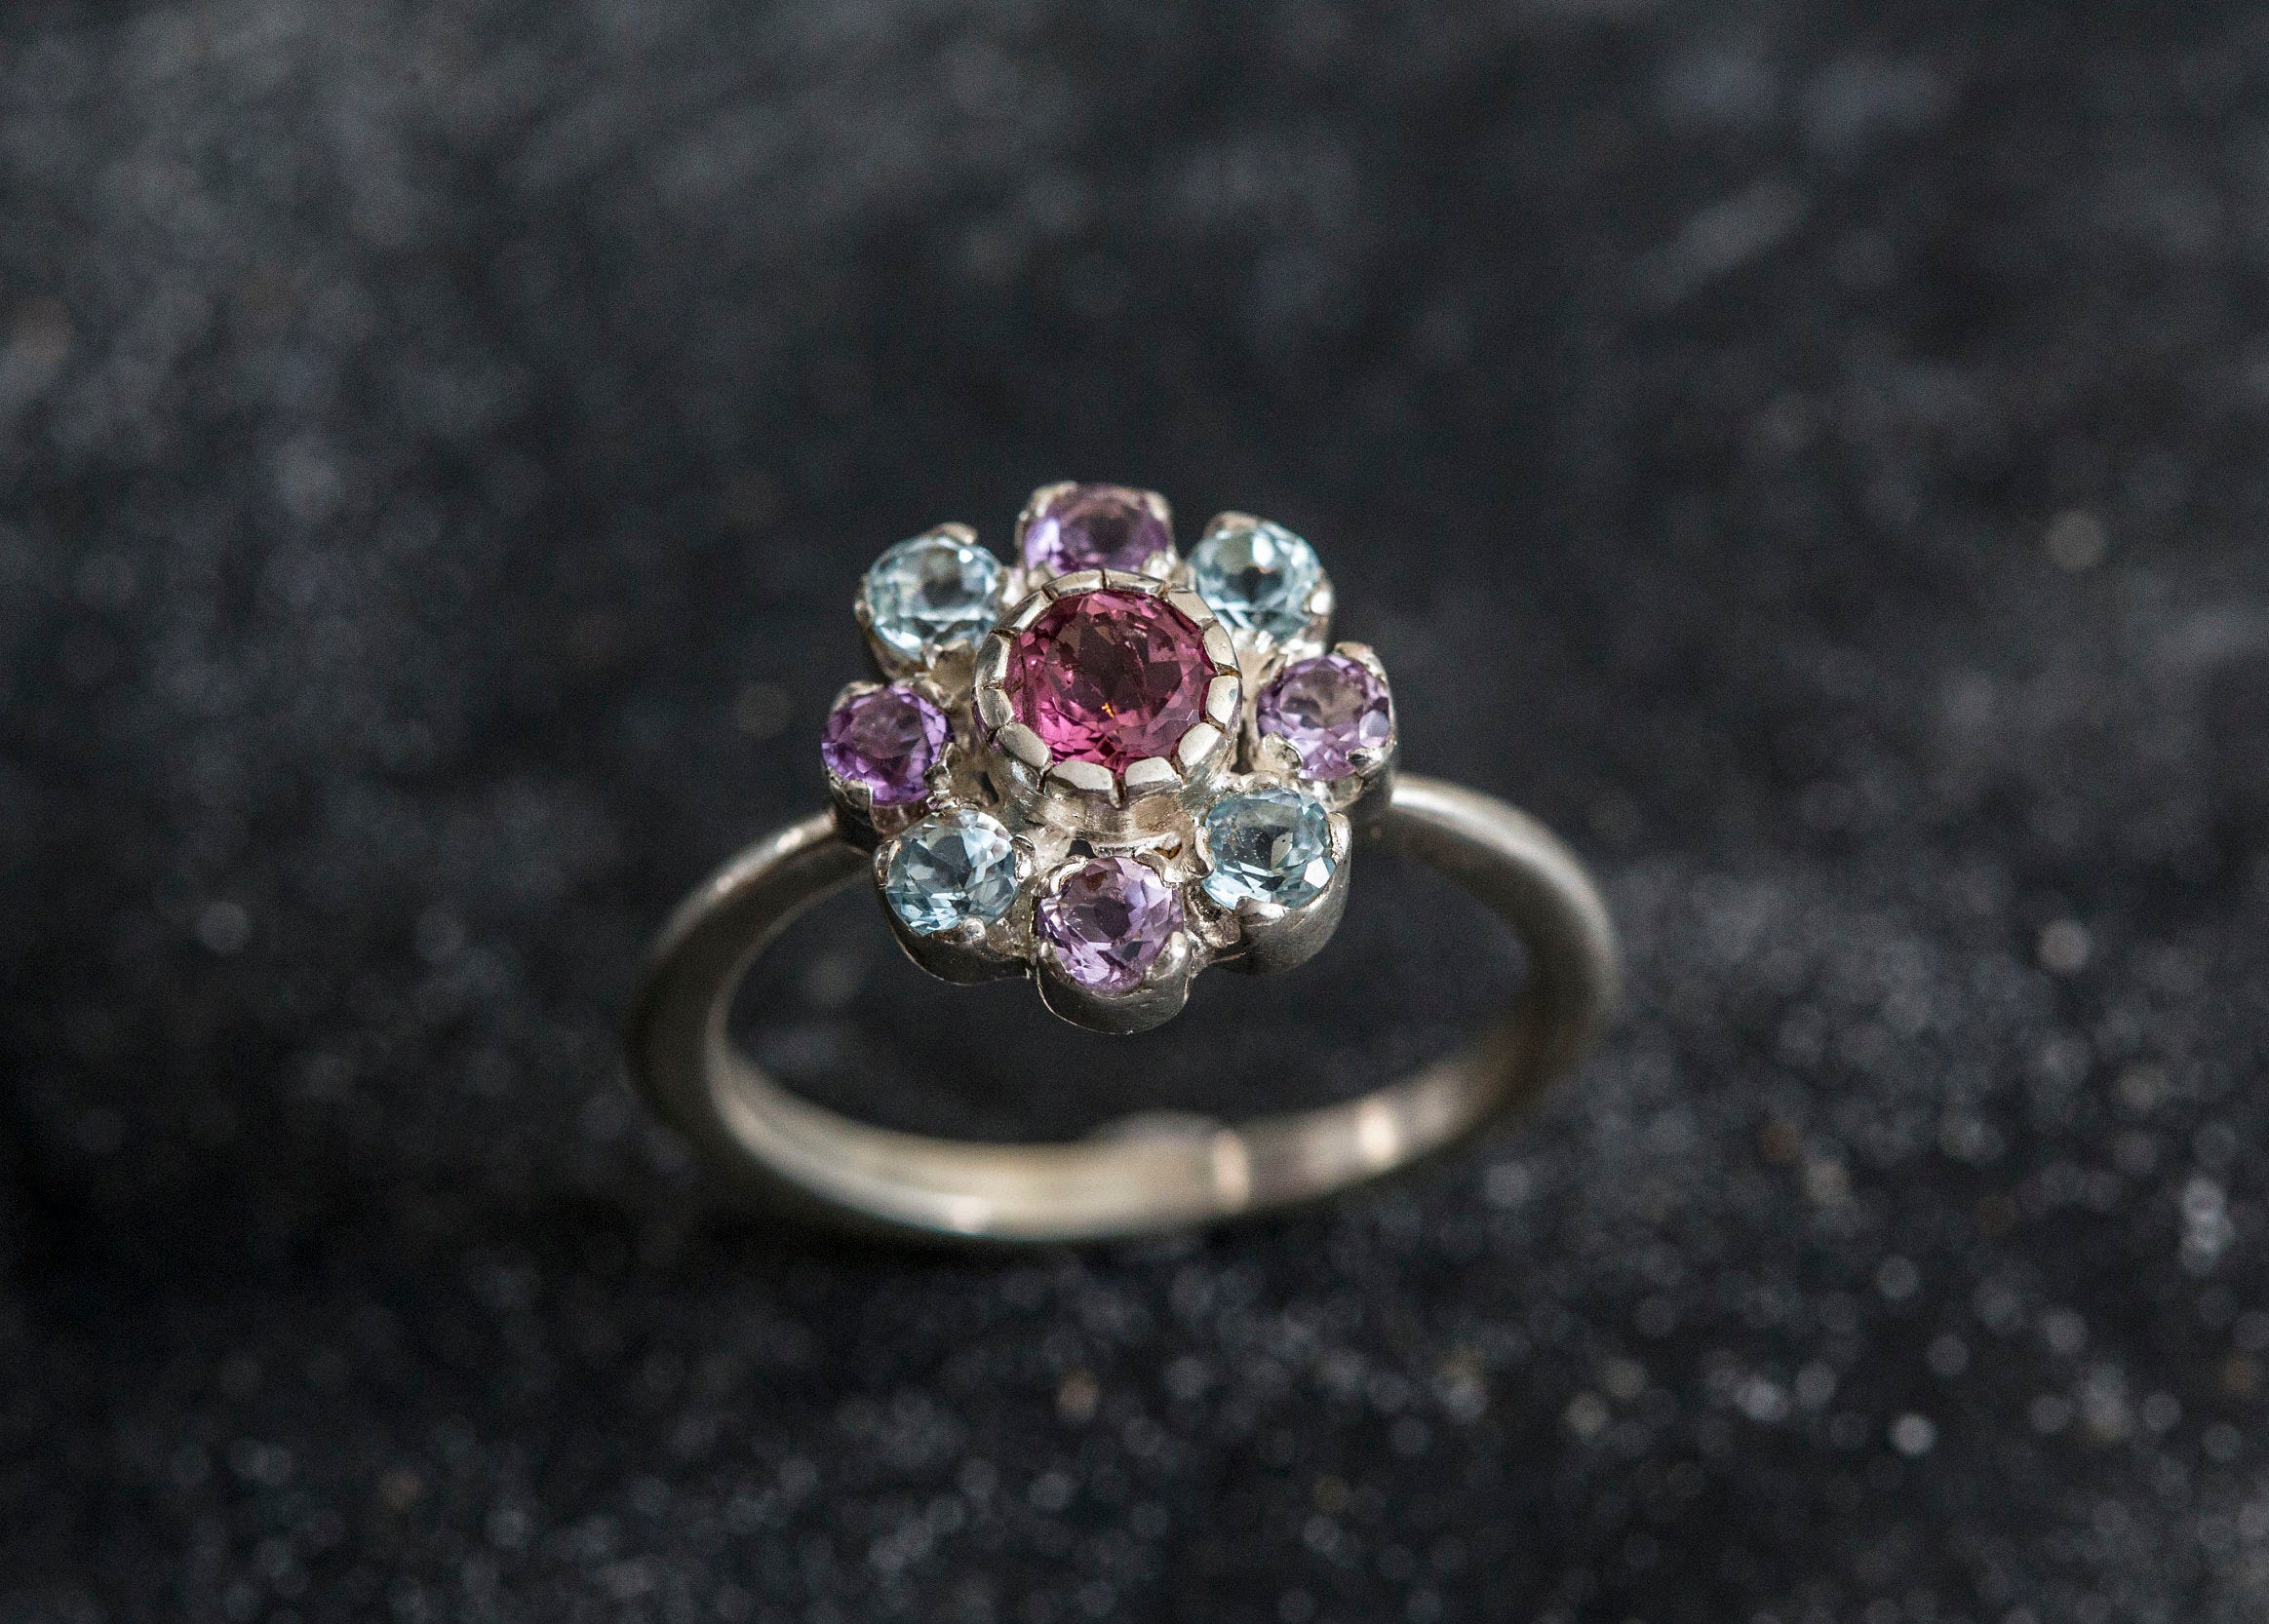 Colorful Flower Ring - Natural Tourmaline Ring - Multistone Vintage Ring